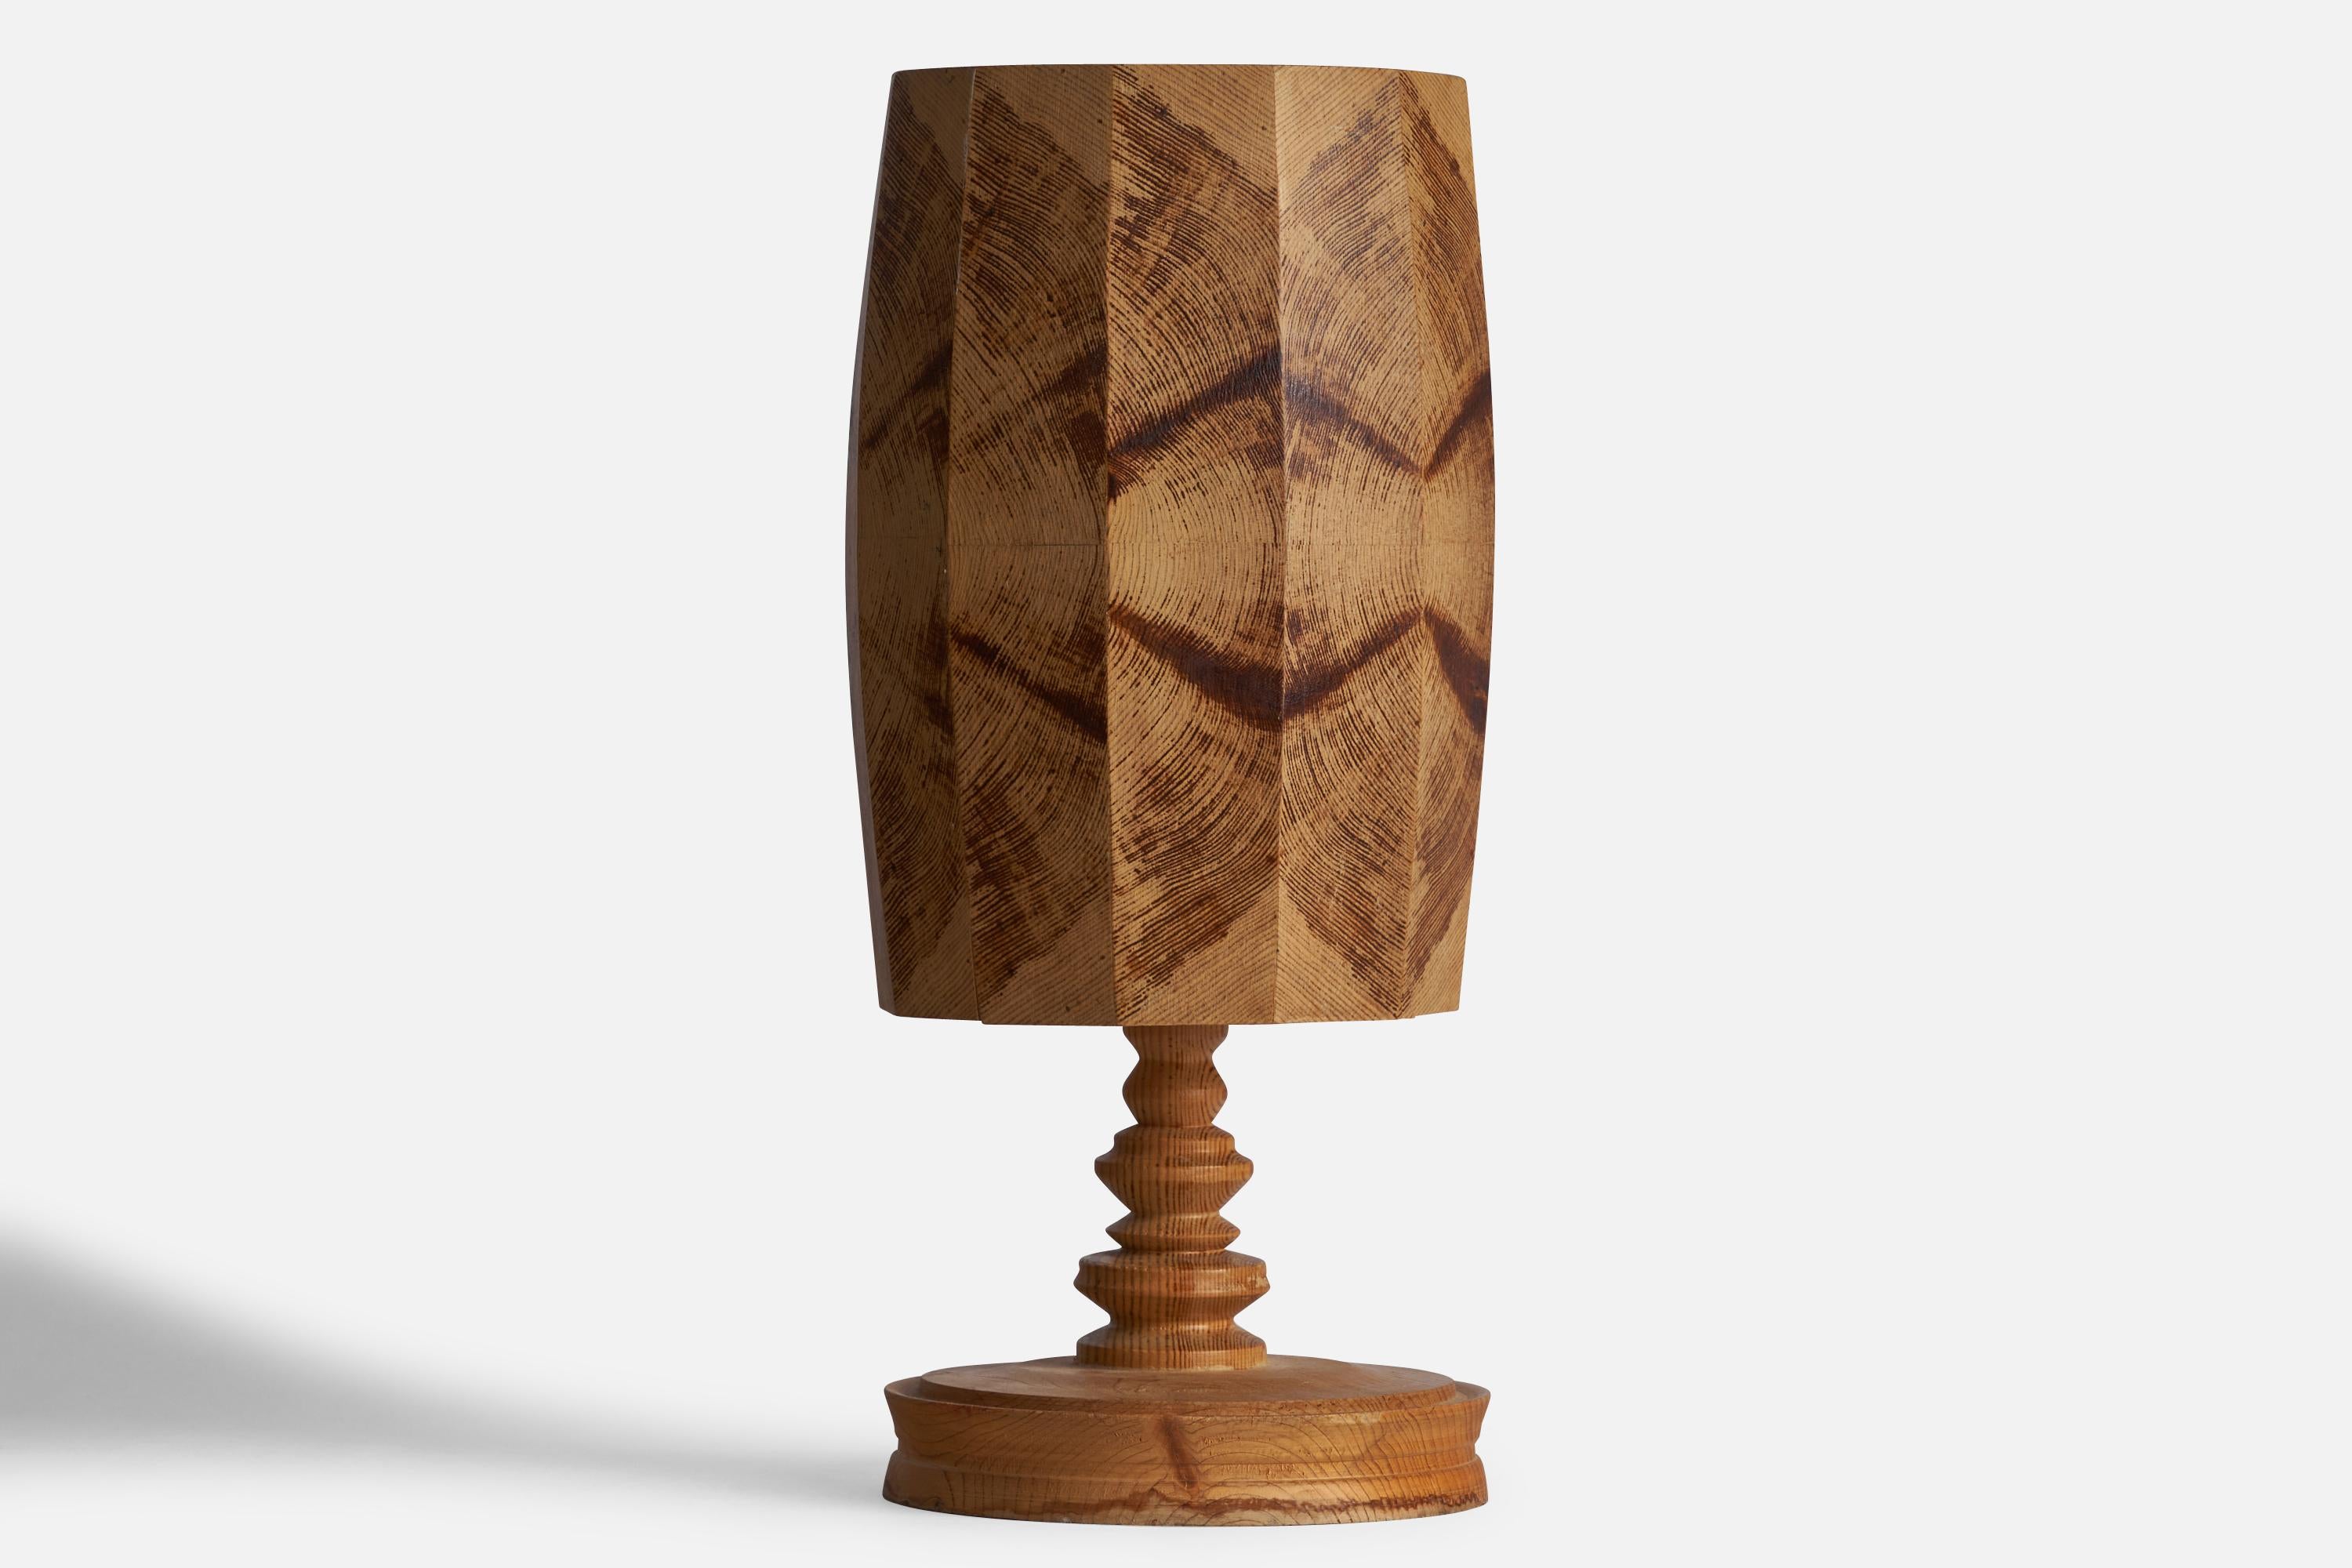 A turned pine and salting table lamp designed and produced in Sweden, 1970s.

Overall Dimensions (inches): 17.25” H x 7.5” diameter 
Bulb Specifications: E-14 Bulb
Number of Sockets: 1
All lighting will be converted for US usage. We is unable to